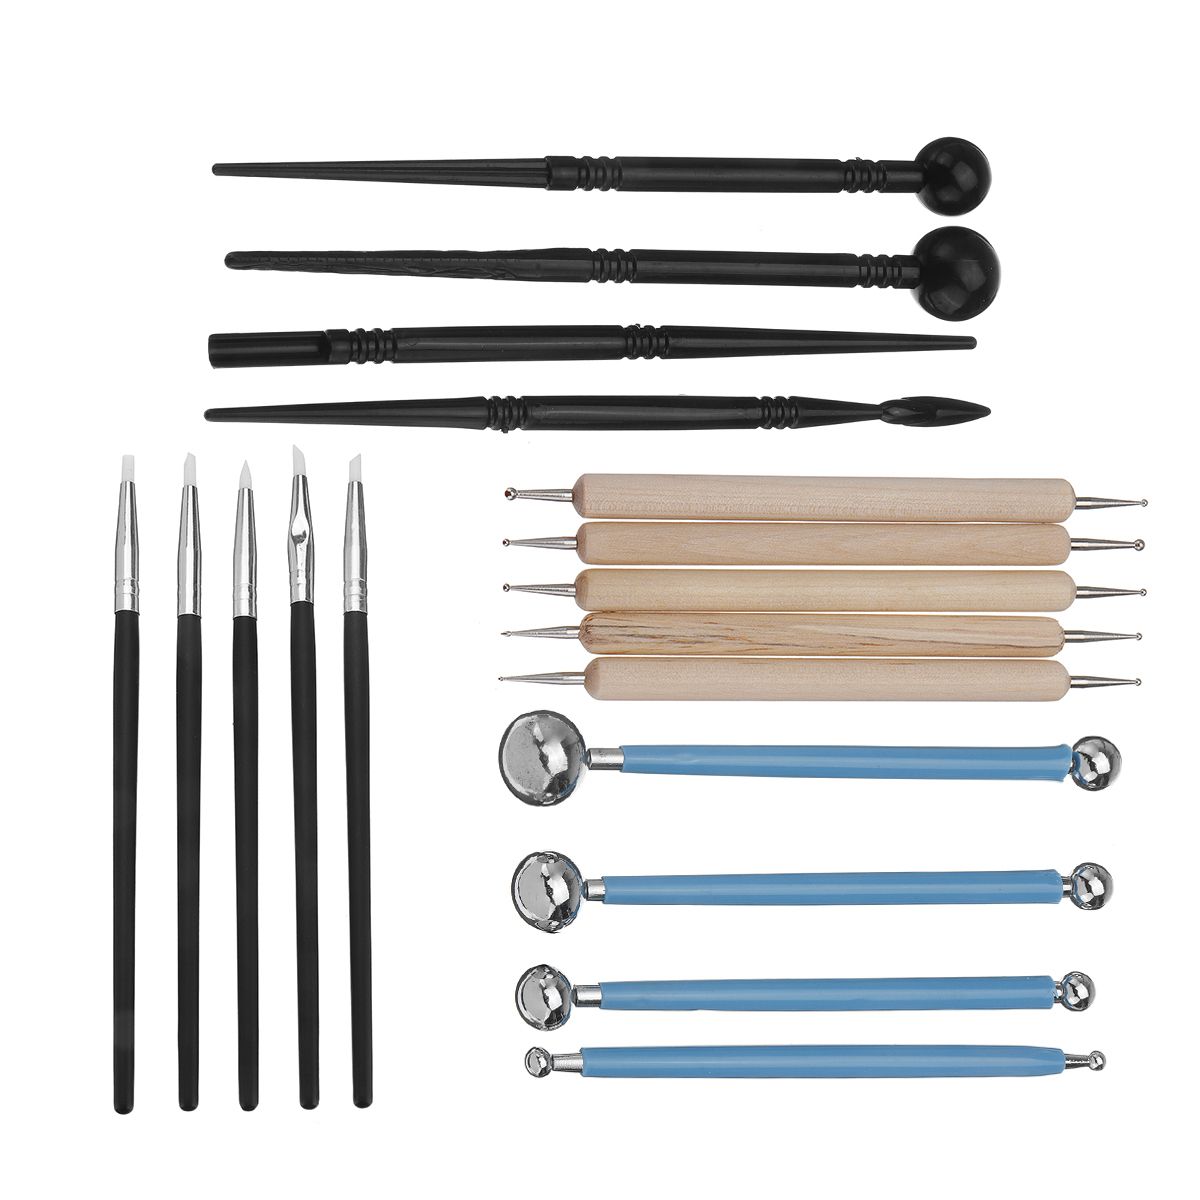 18-pcs-Professional-Polymer-Clay-Sculpting-Tools-Pottery-Models-Art-Projects-Kit-1533747